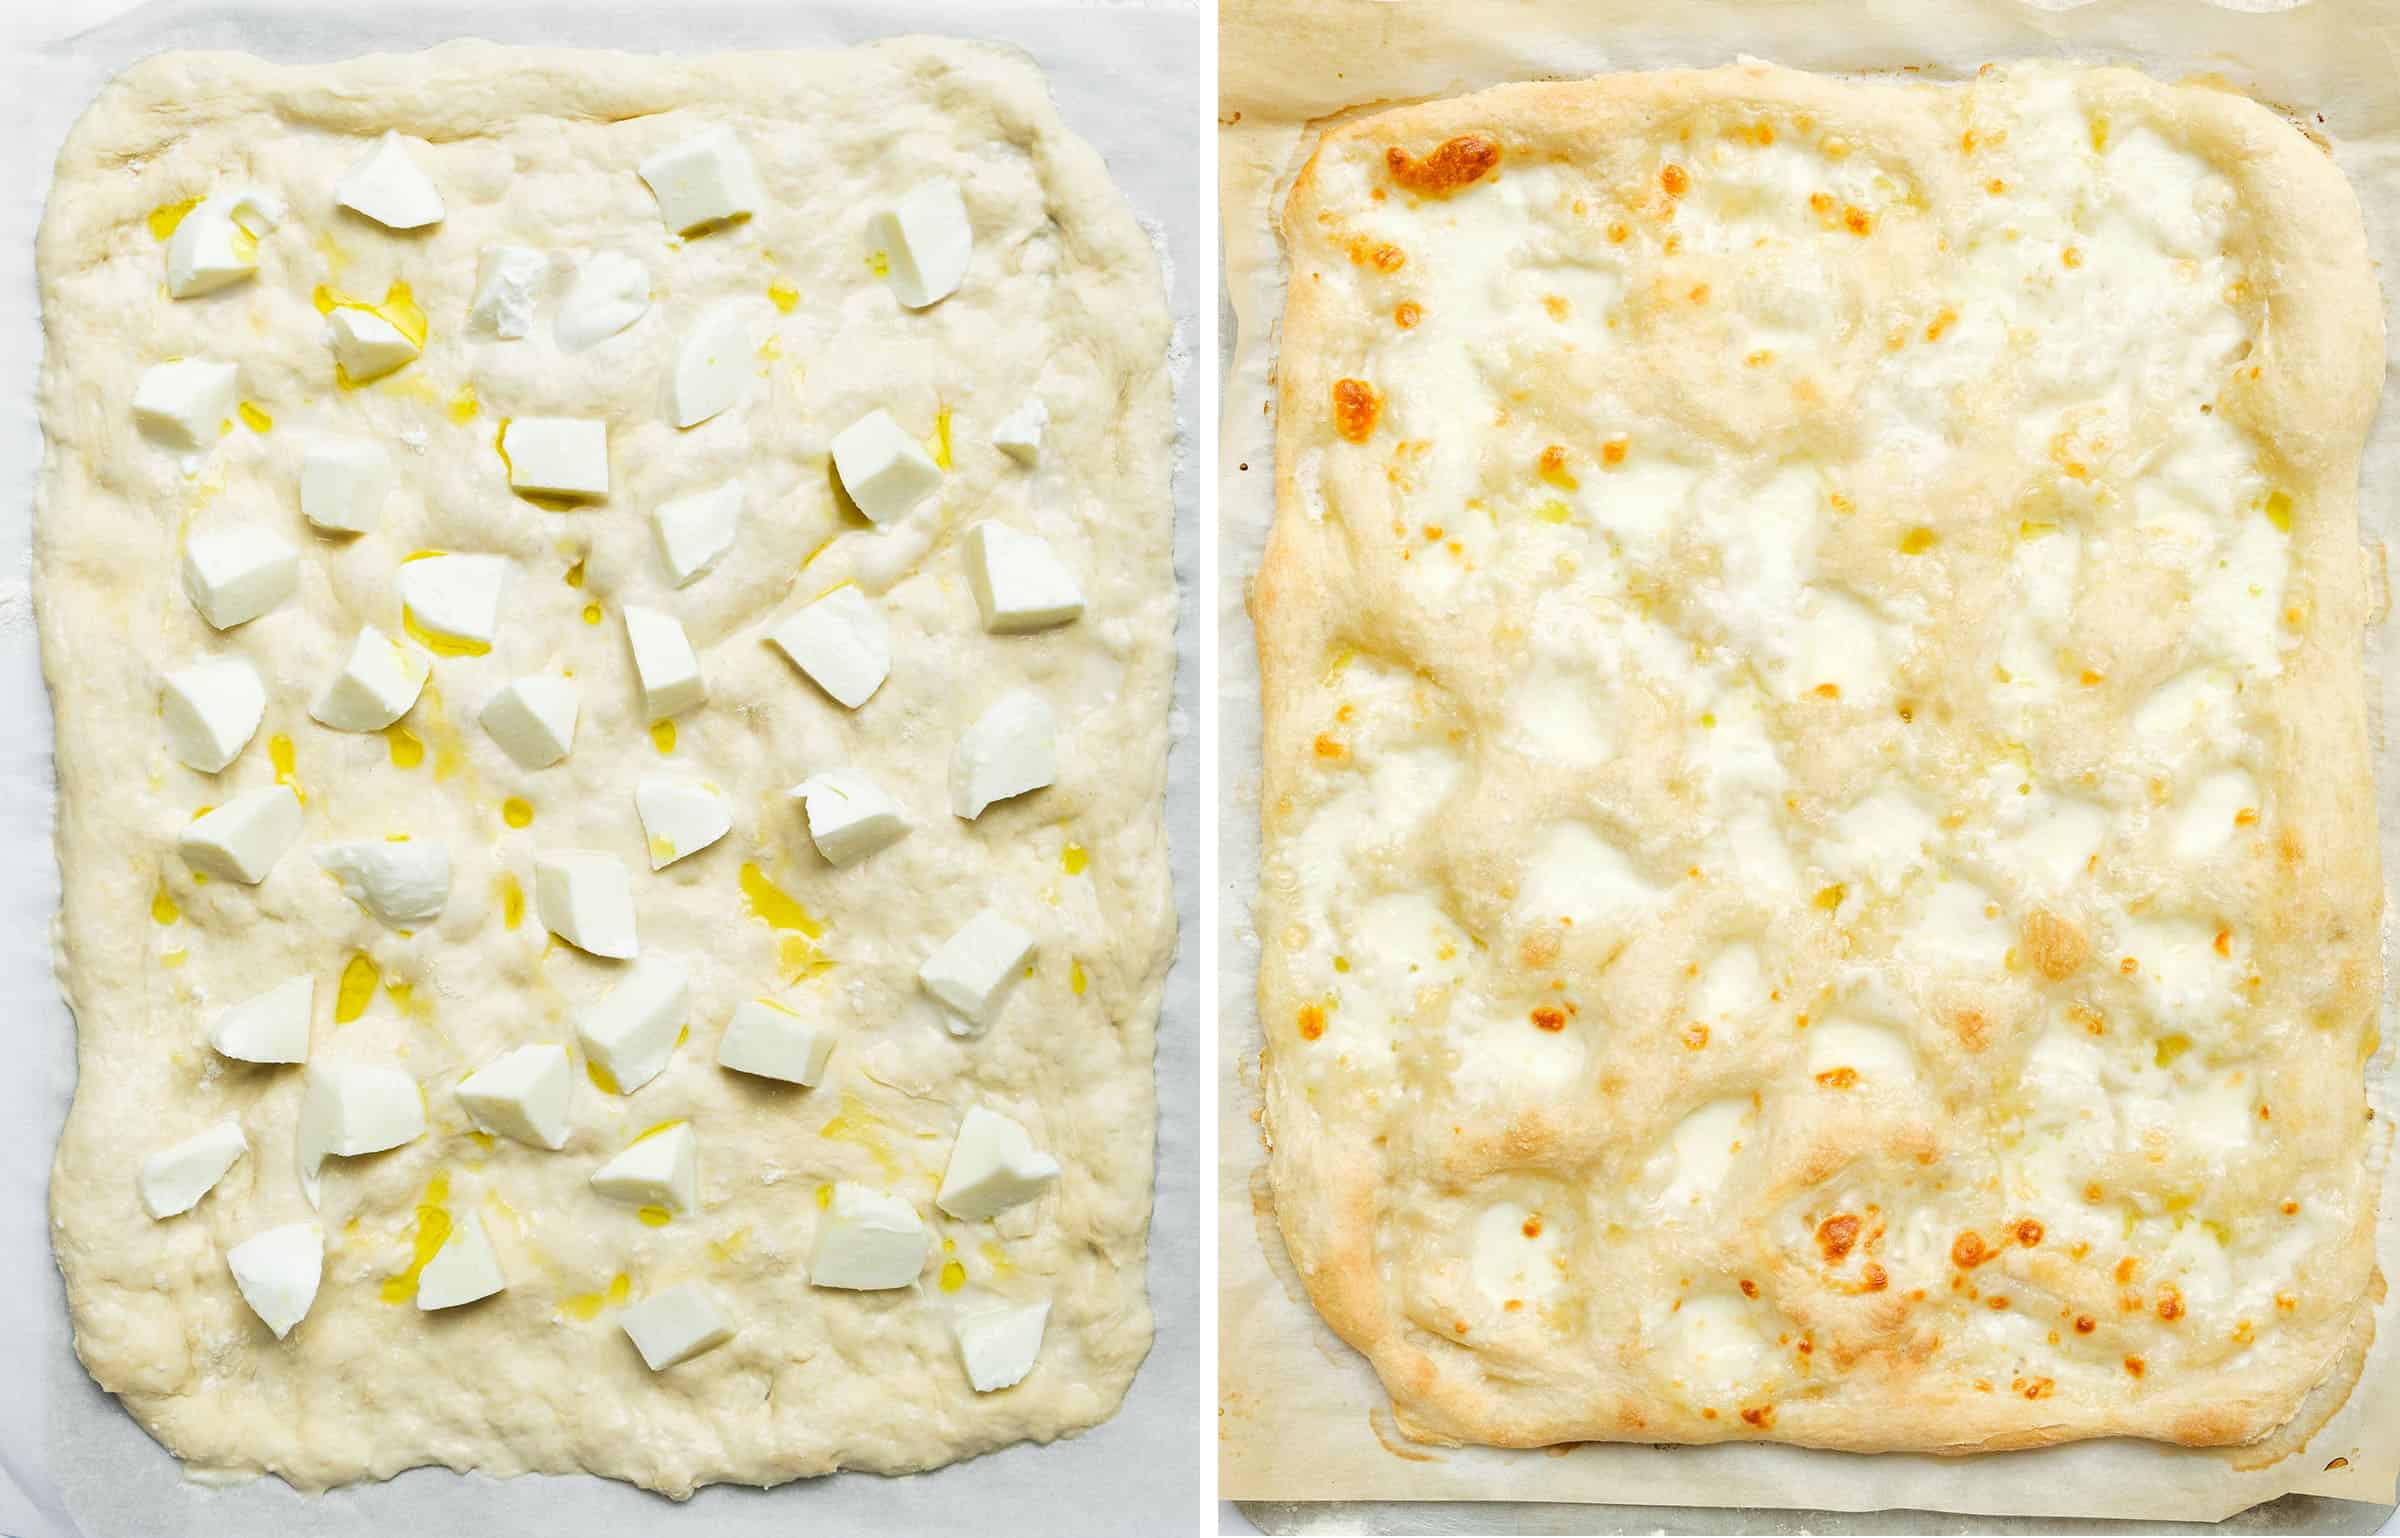 Top view of a white pizza with mozzarella before and after baking.